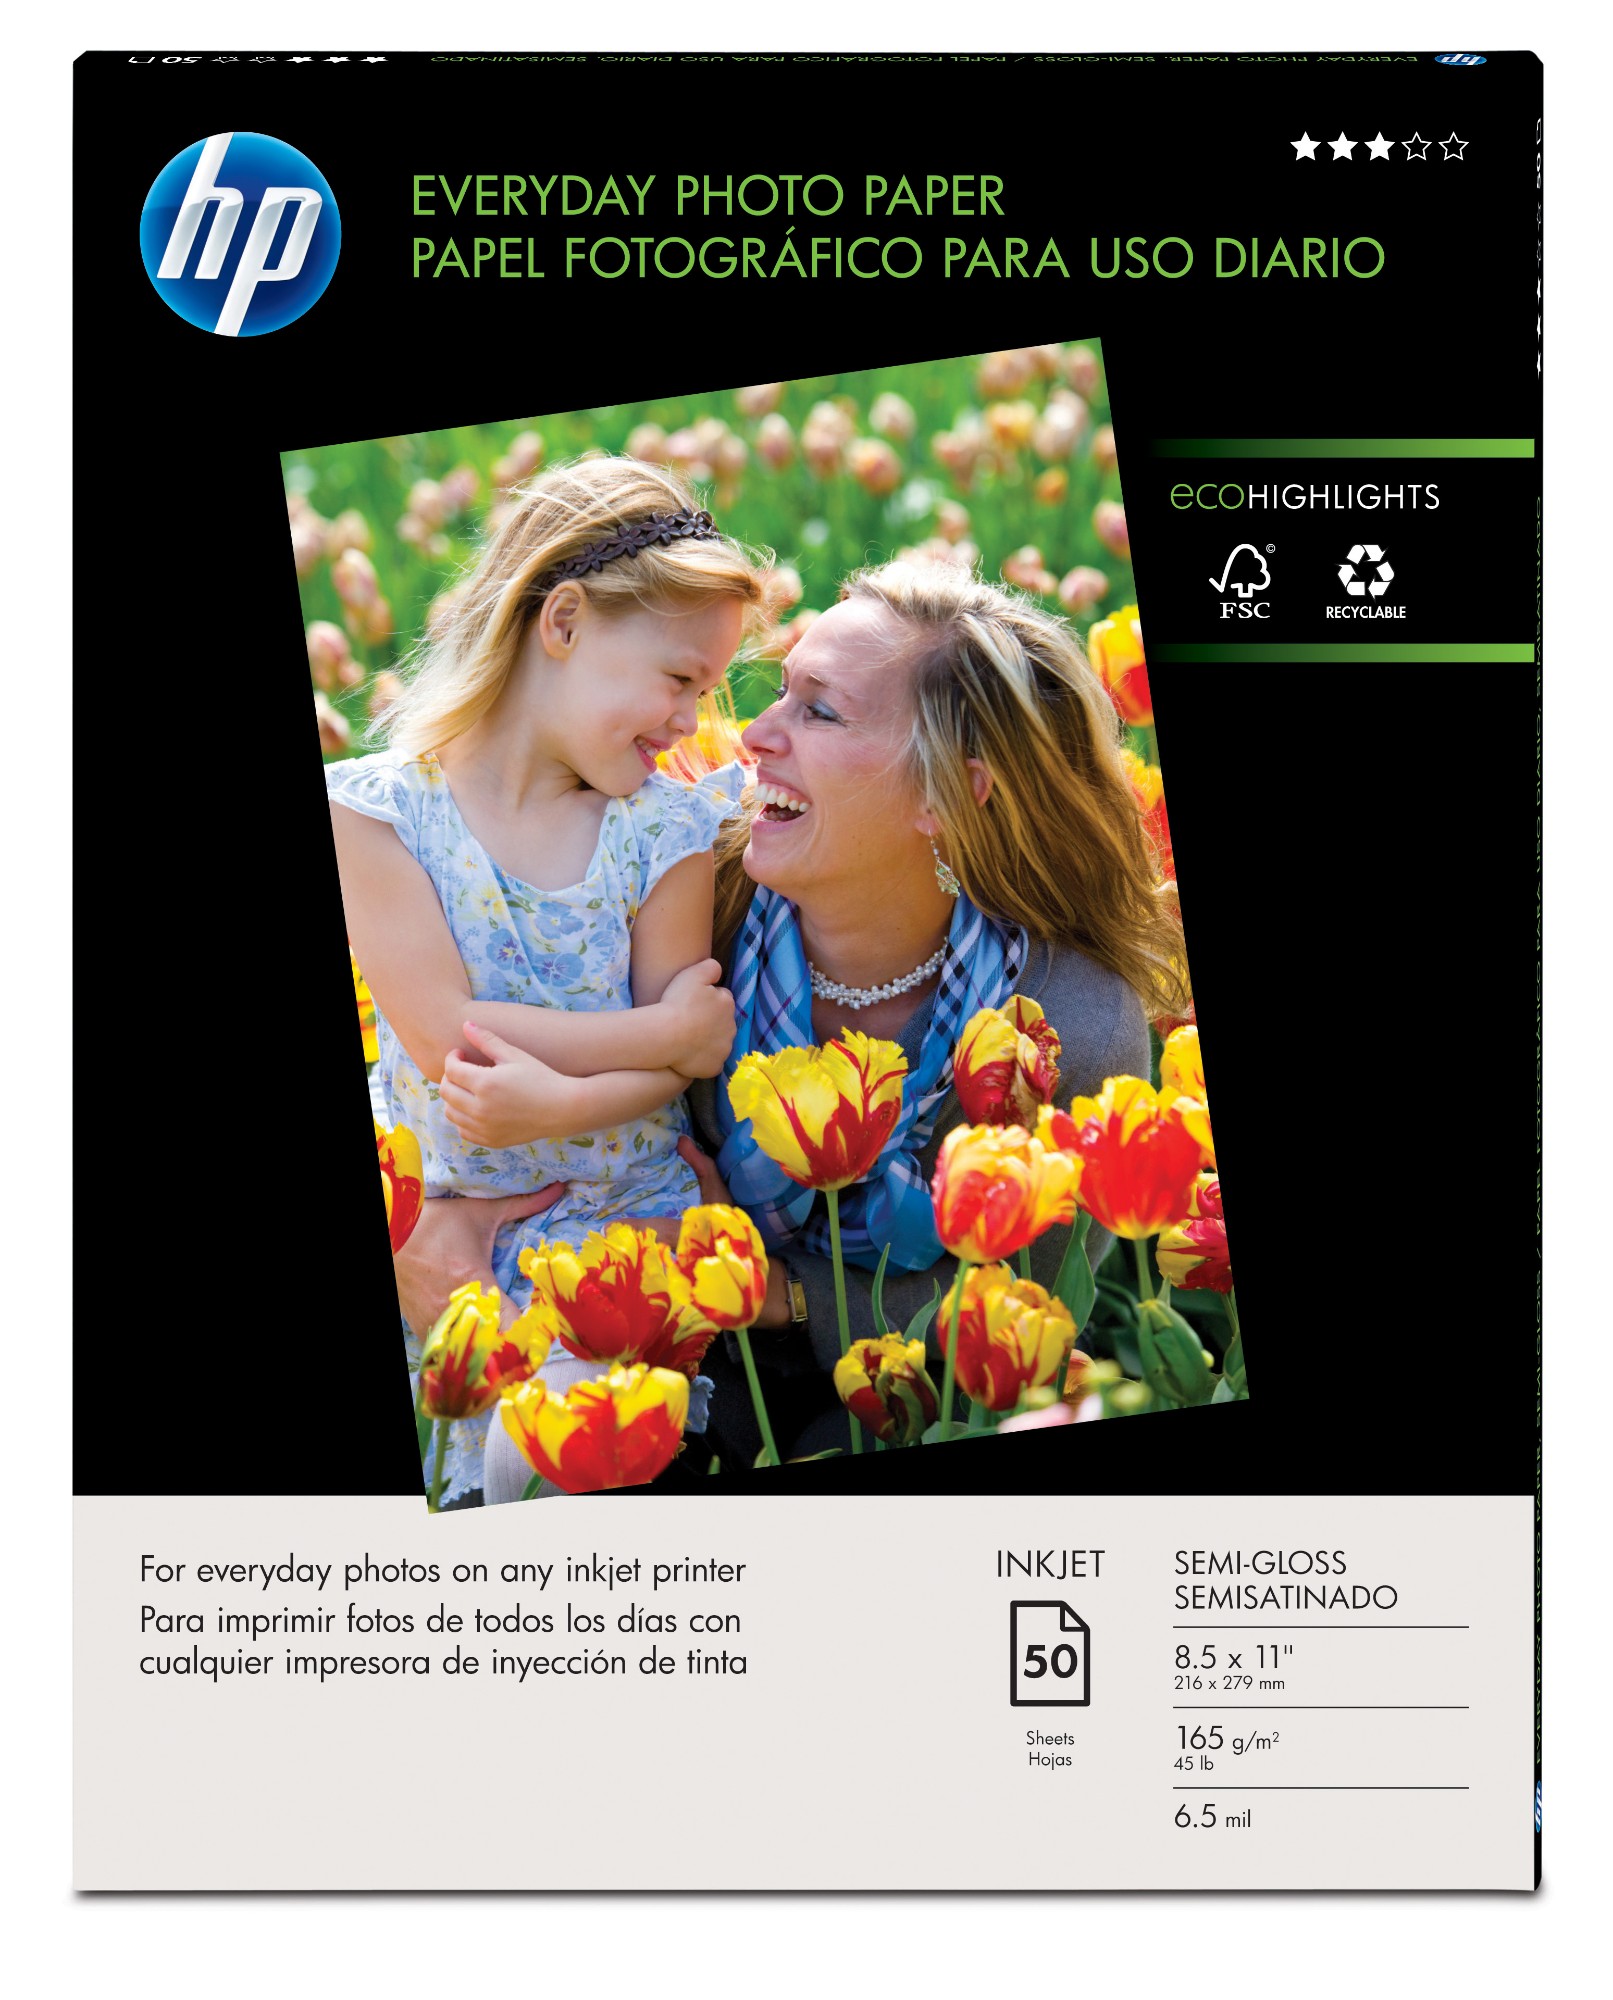 HP Everyday Photo Paper, Glossy, 52 lb, 8.5 x 11 in. (216 x 279 mm